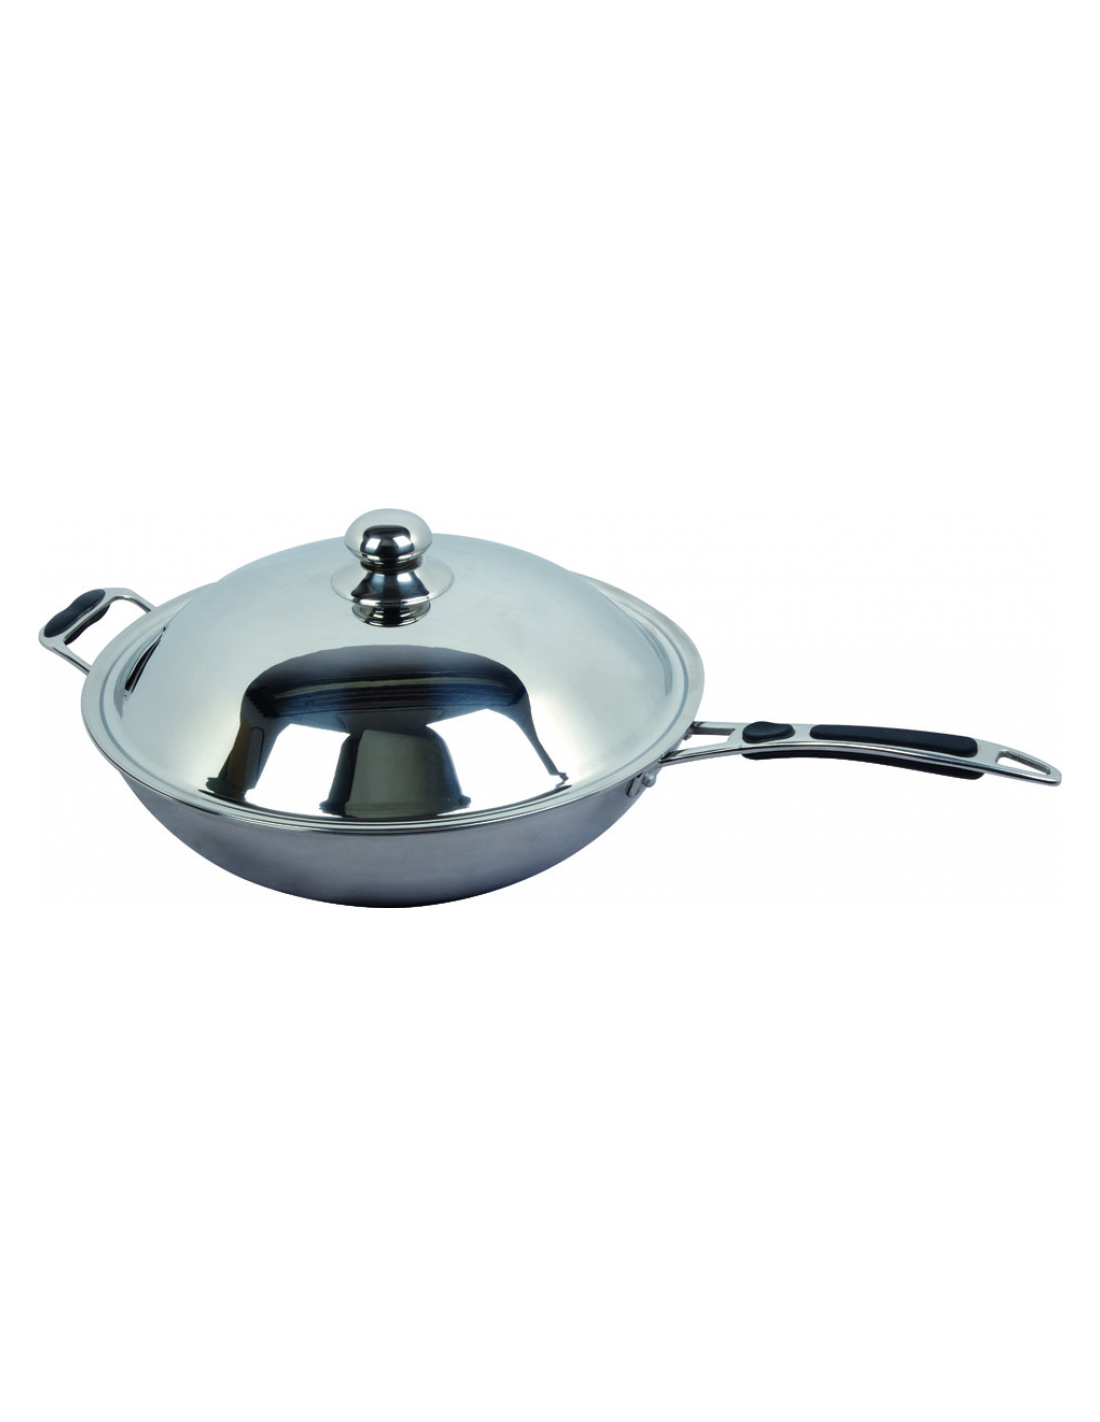 Wok frying pan - ø mm 36 x 18 h - 3-layer material - Stainless steel handle